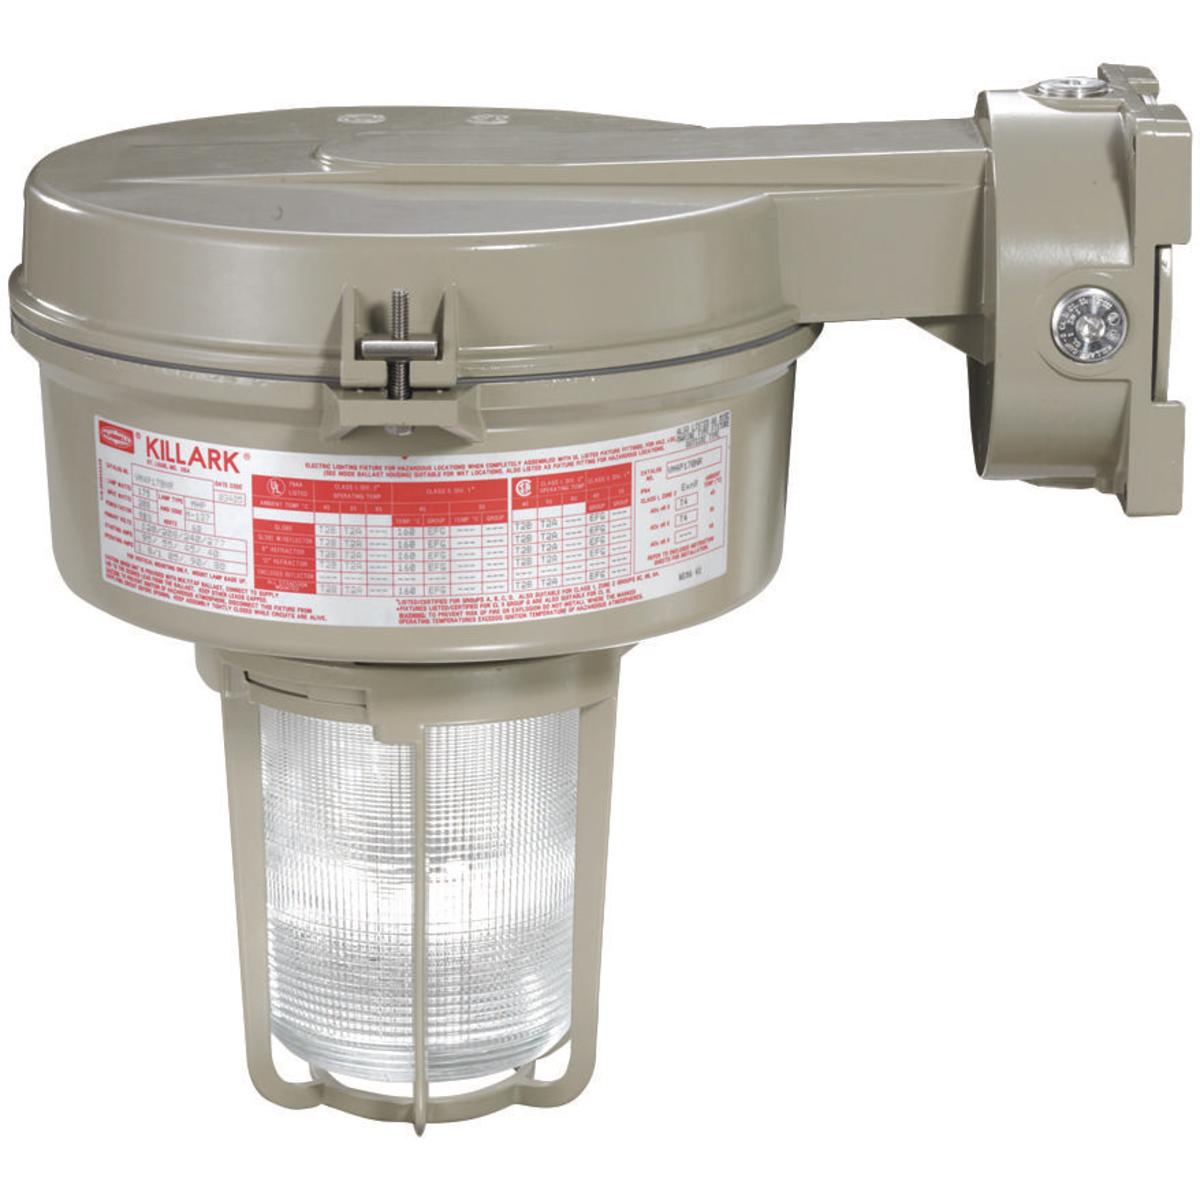 Hubbell VM3S105B2R5G VM3 Series - 100W High Pressure Sodium 480V - 3/4" Wall Mount - Type V Glass Refractor and Guard  ; Ballast tank and splice box – corrosion resistant copper-free aluminum alloy with baked powder epoxy/polyester finish, electrostatically applied for comple